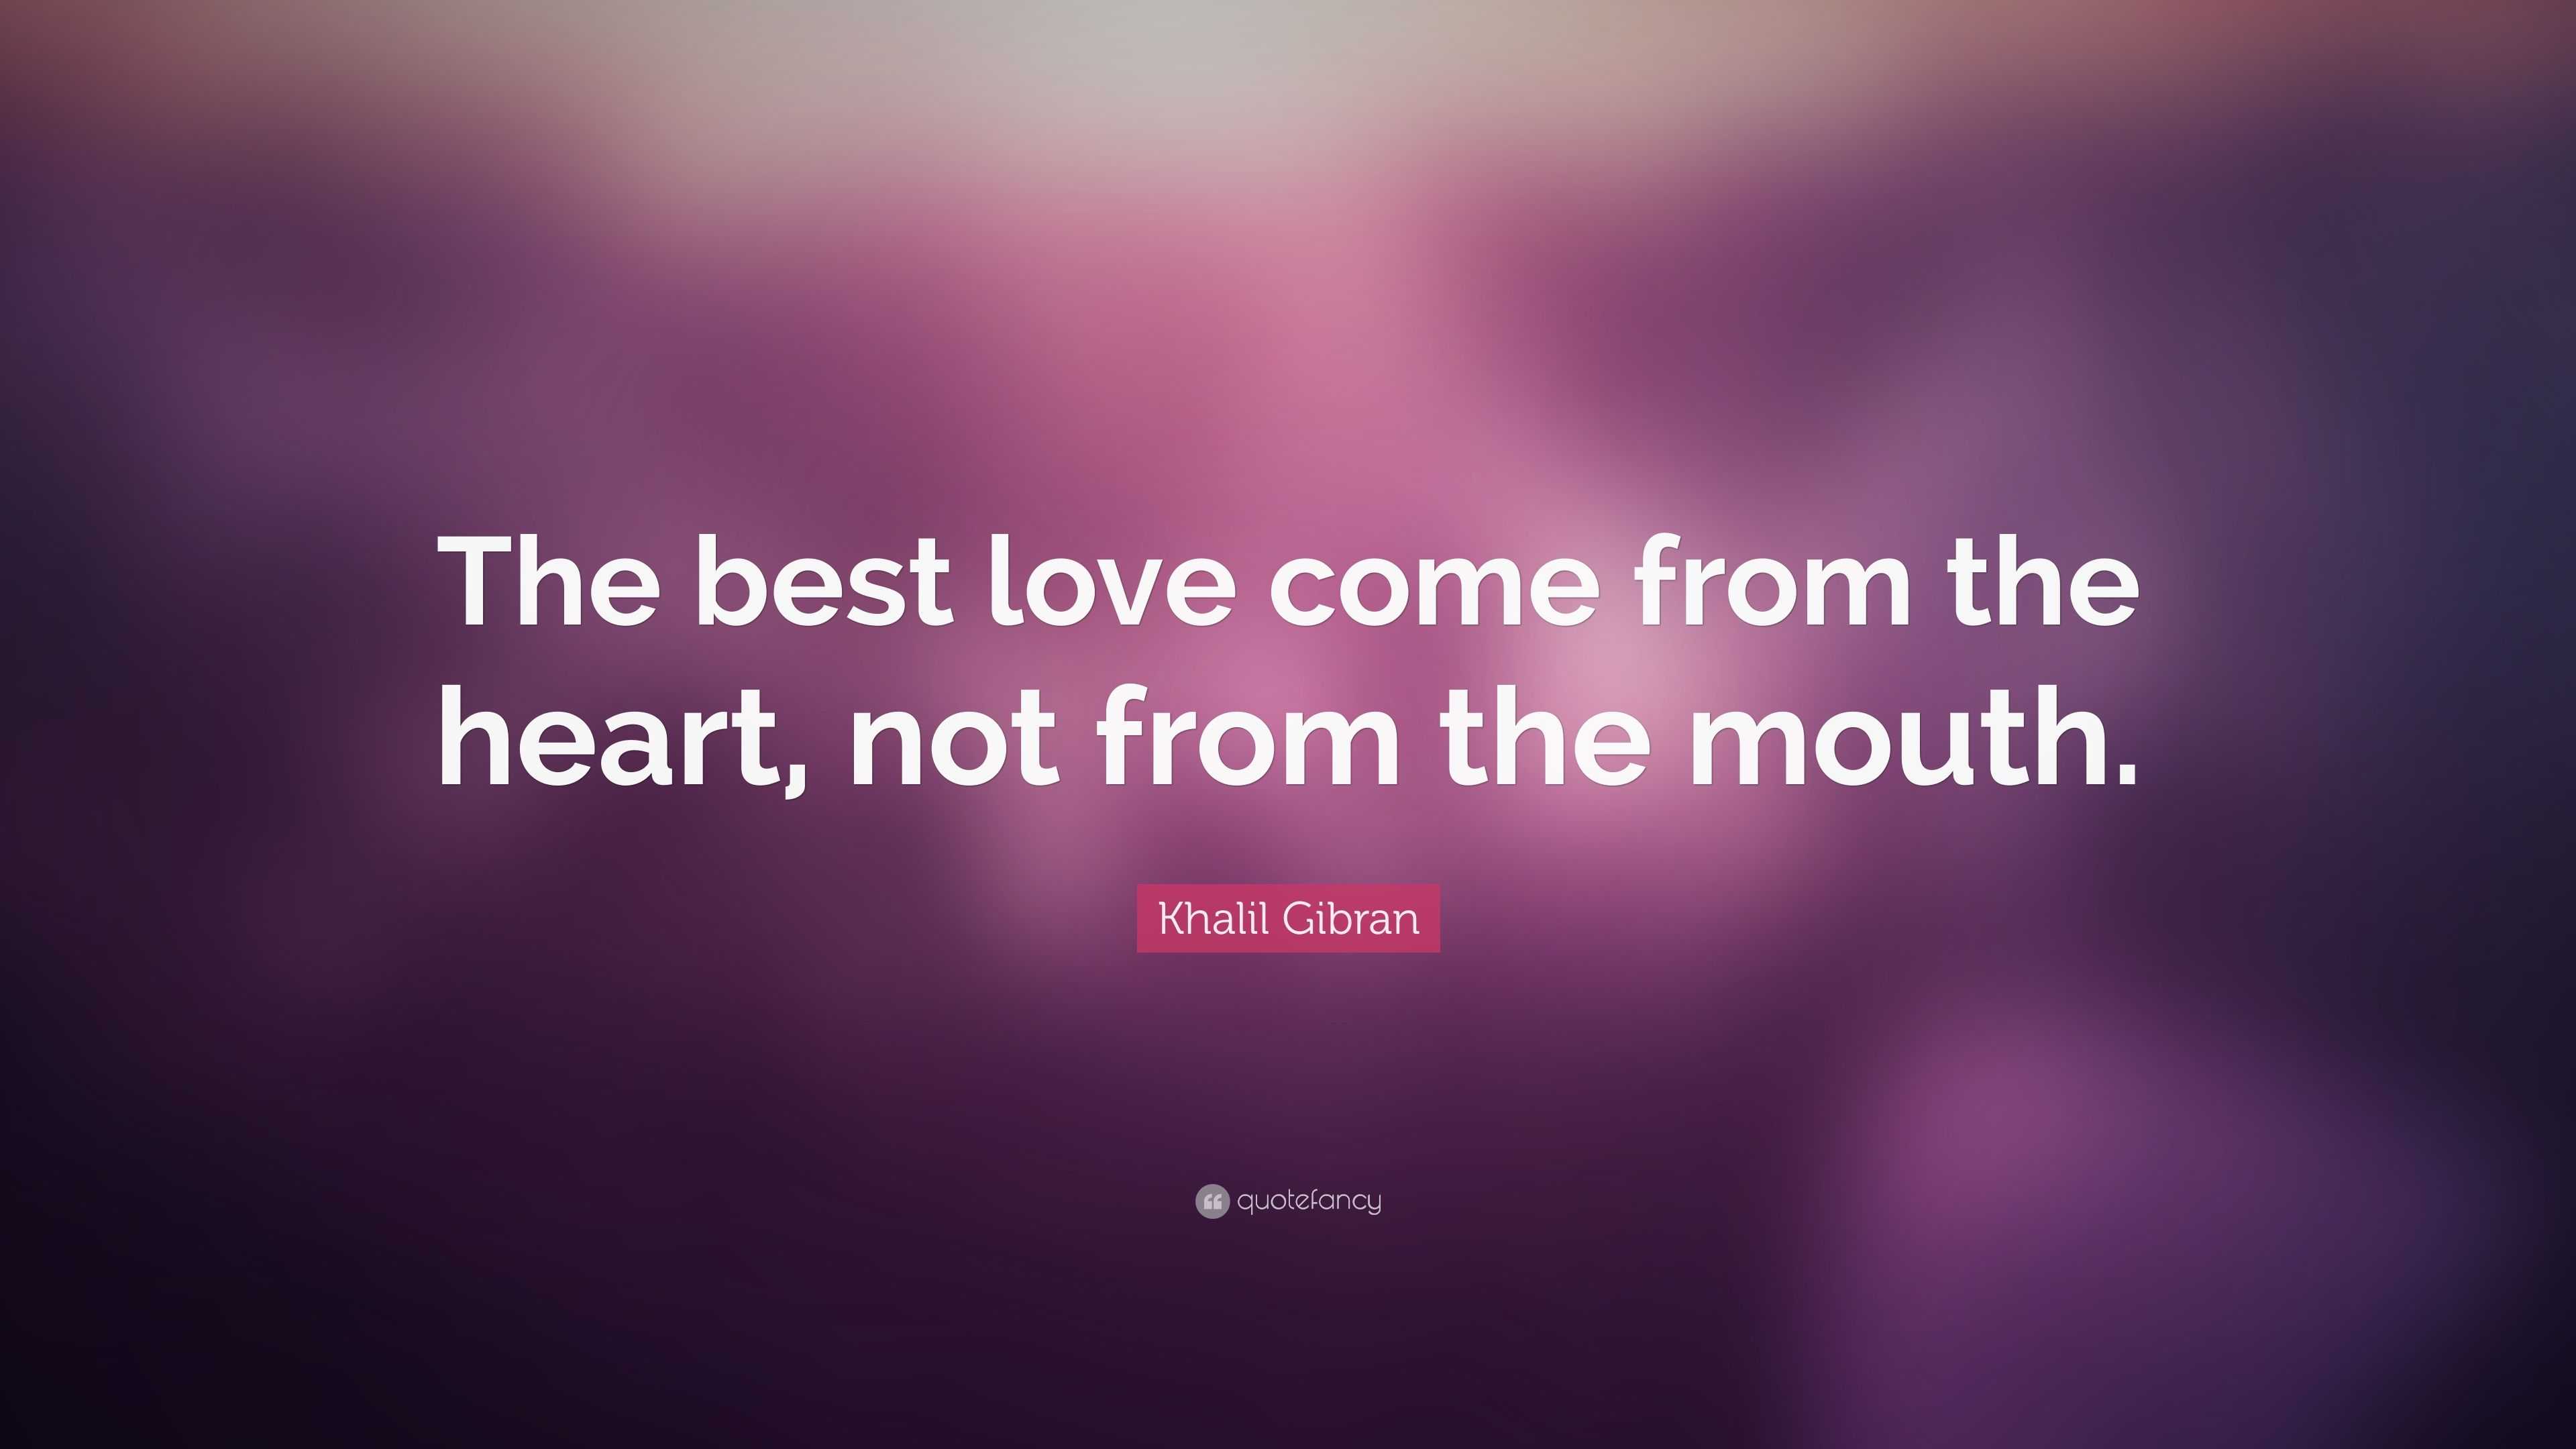 Love is true when it comes from the heart, not from the mouth